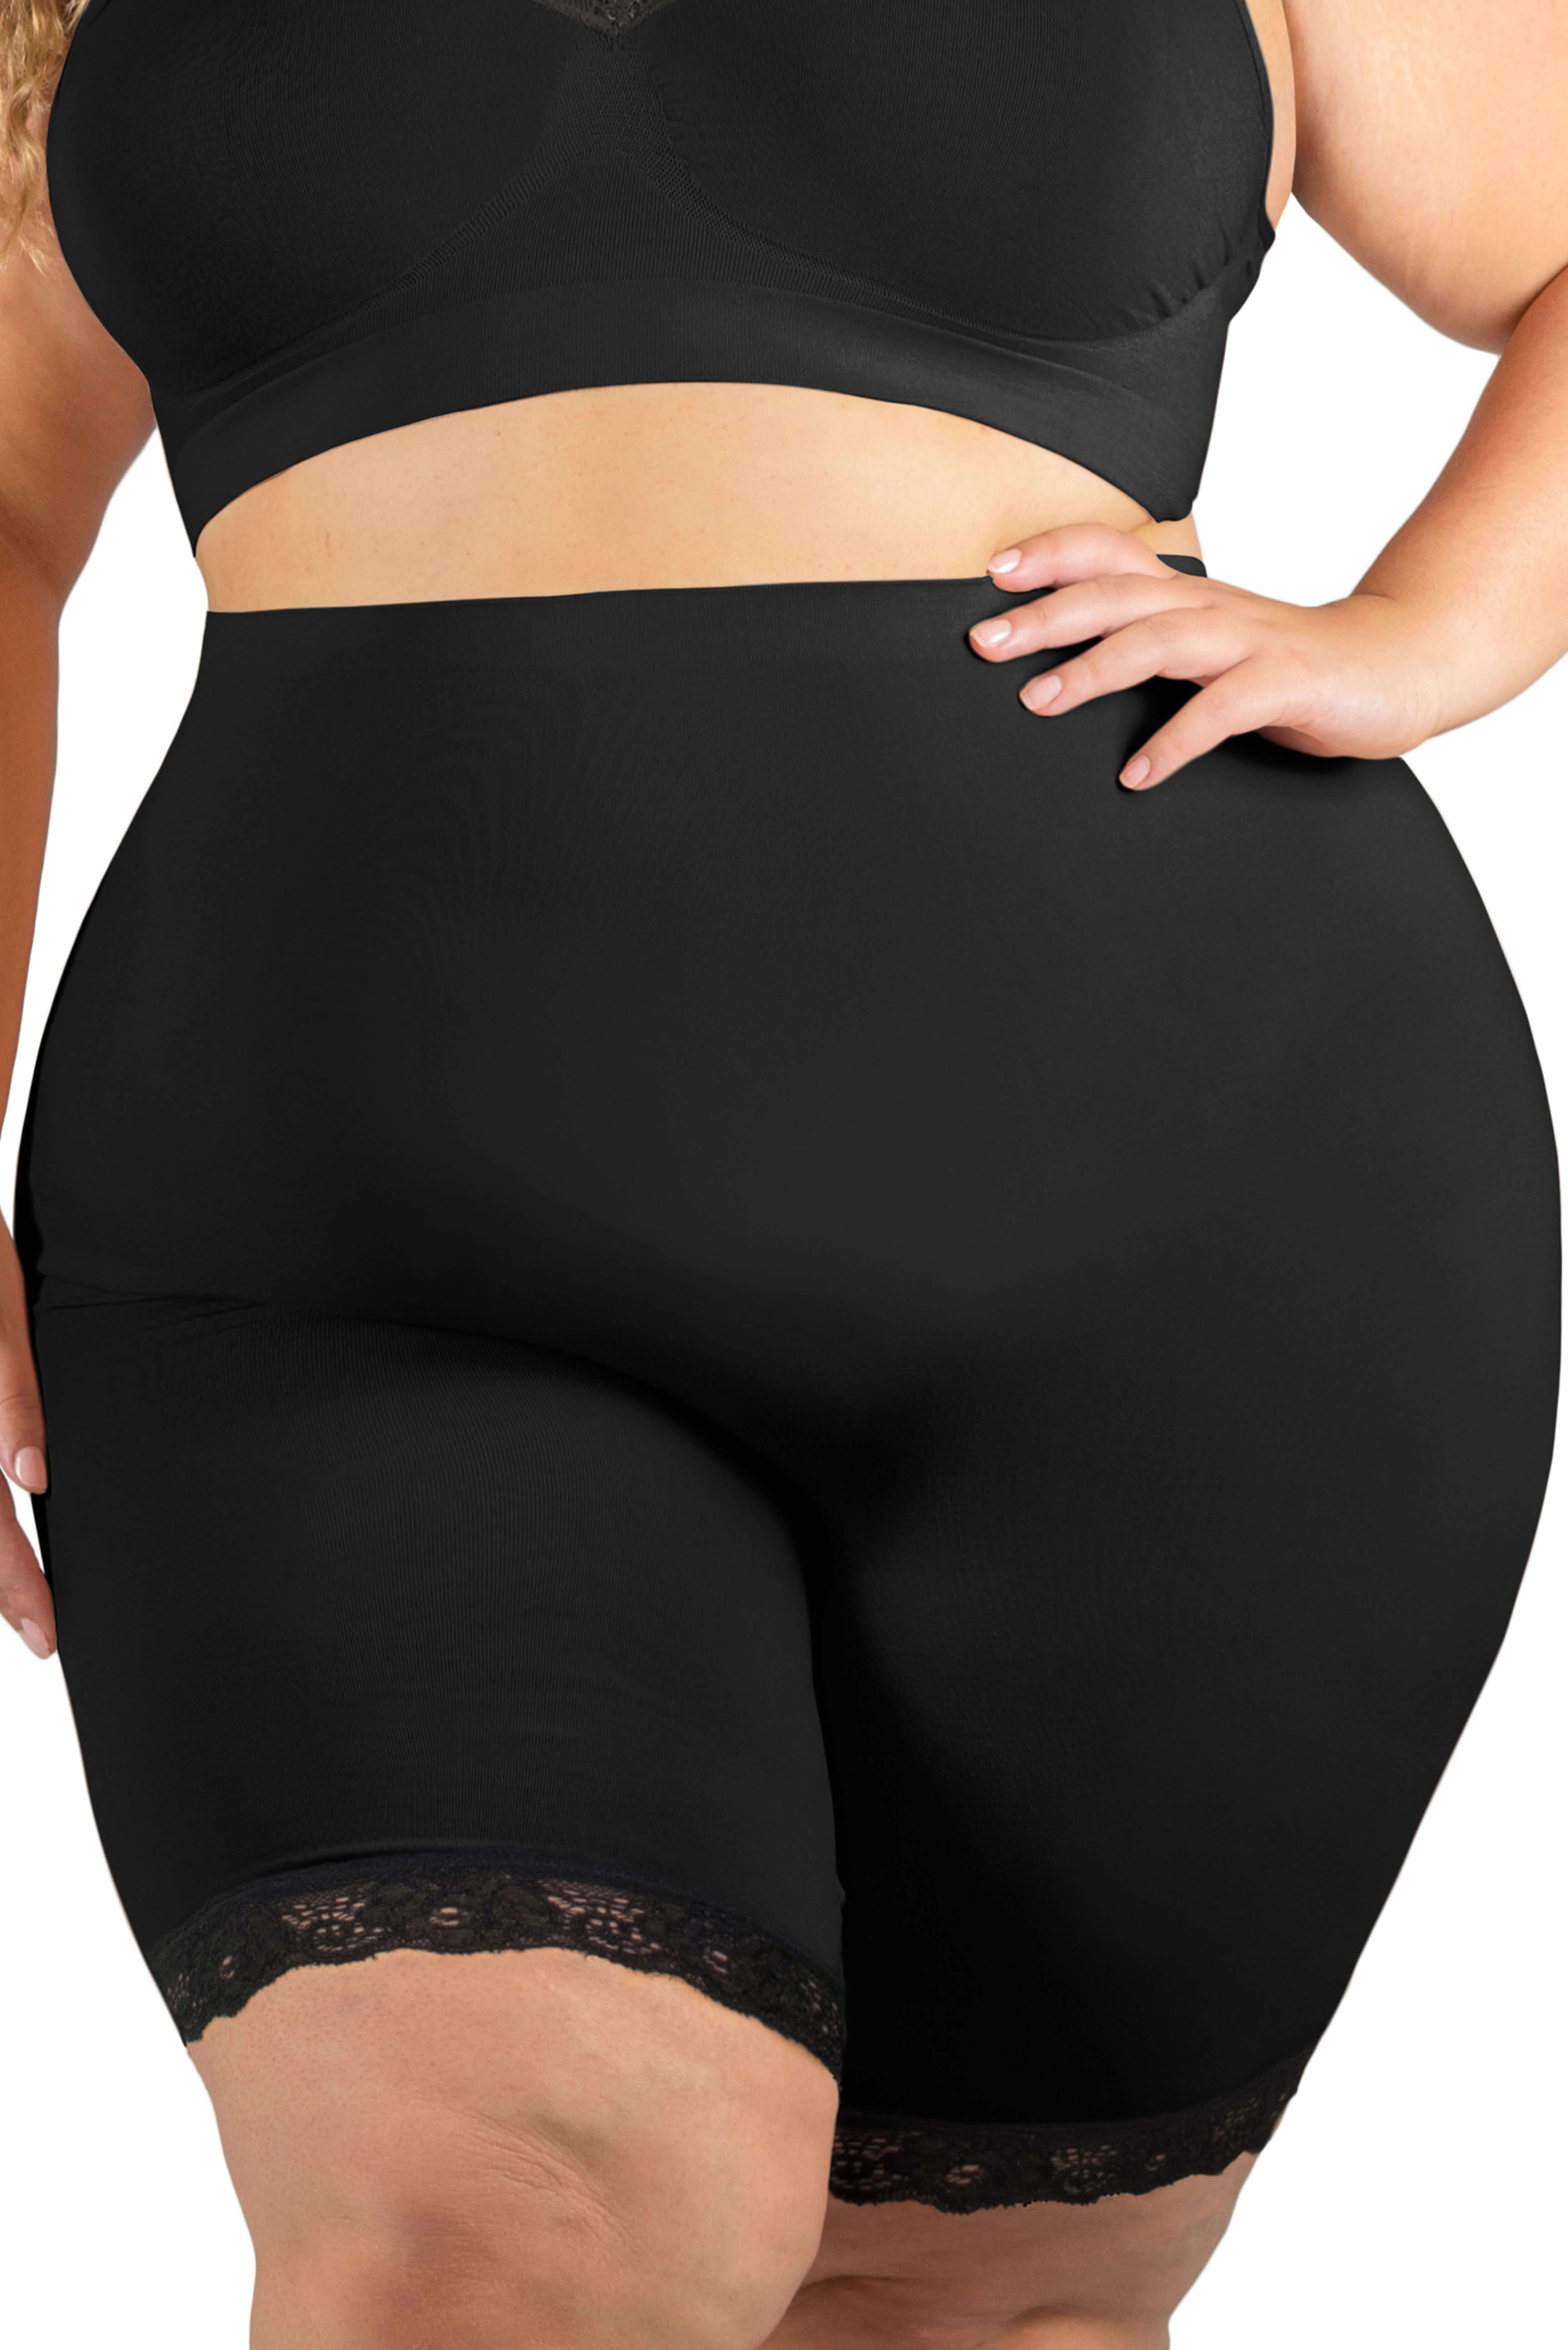 Plus Size Black Anti Chafing High Waisted Shorts, Sizes 16 to 36